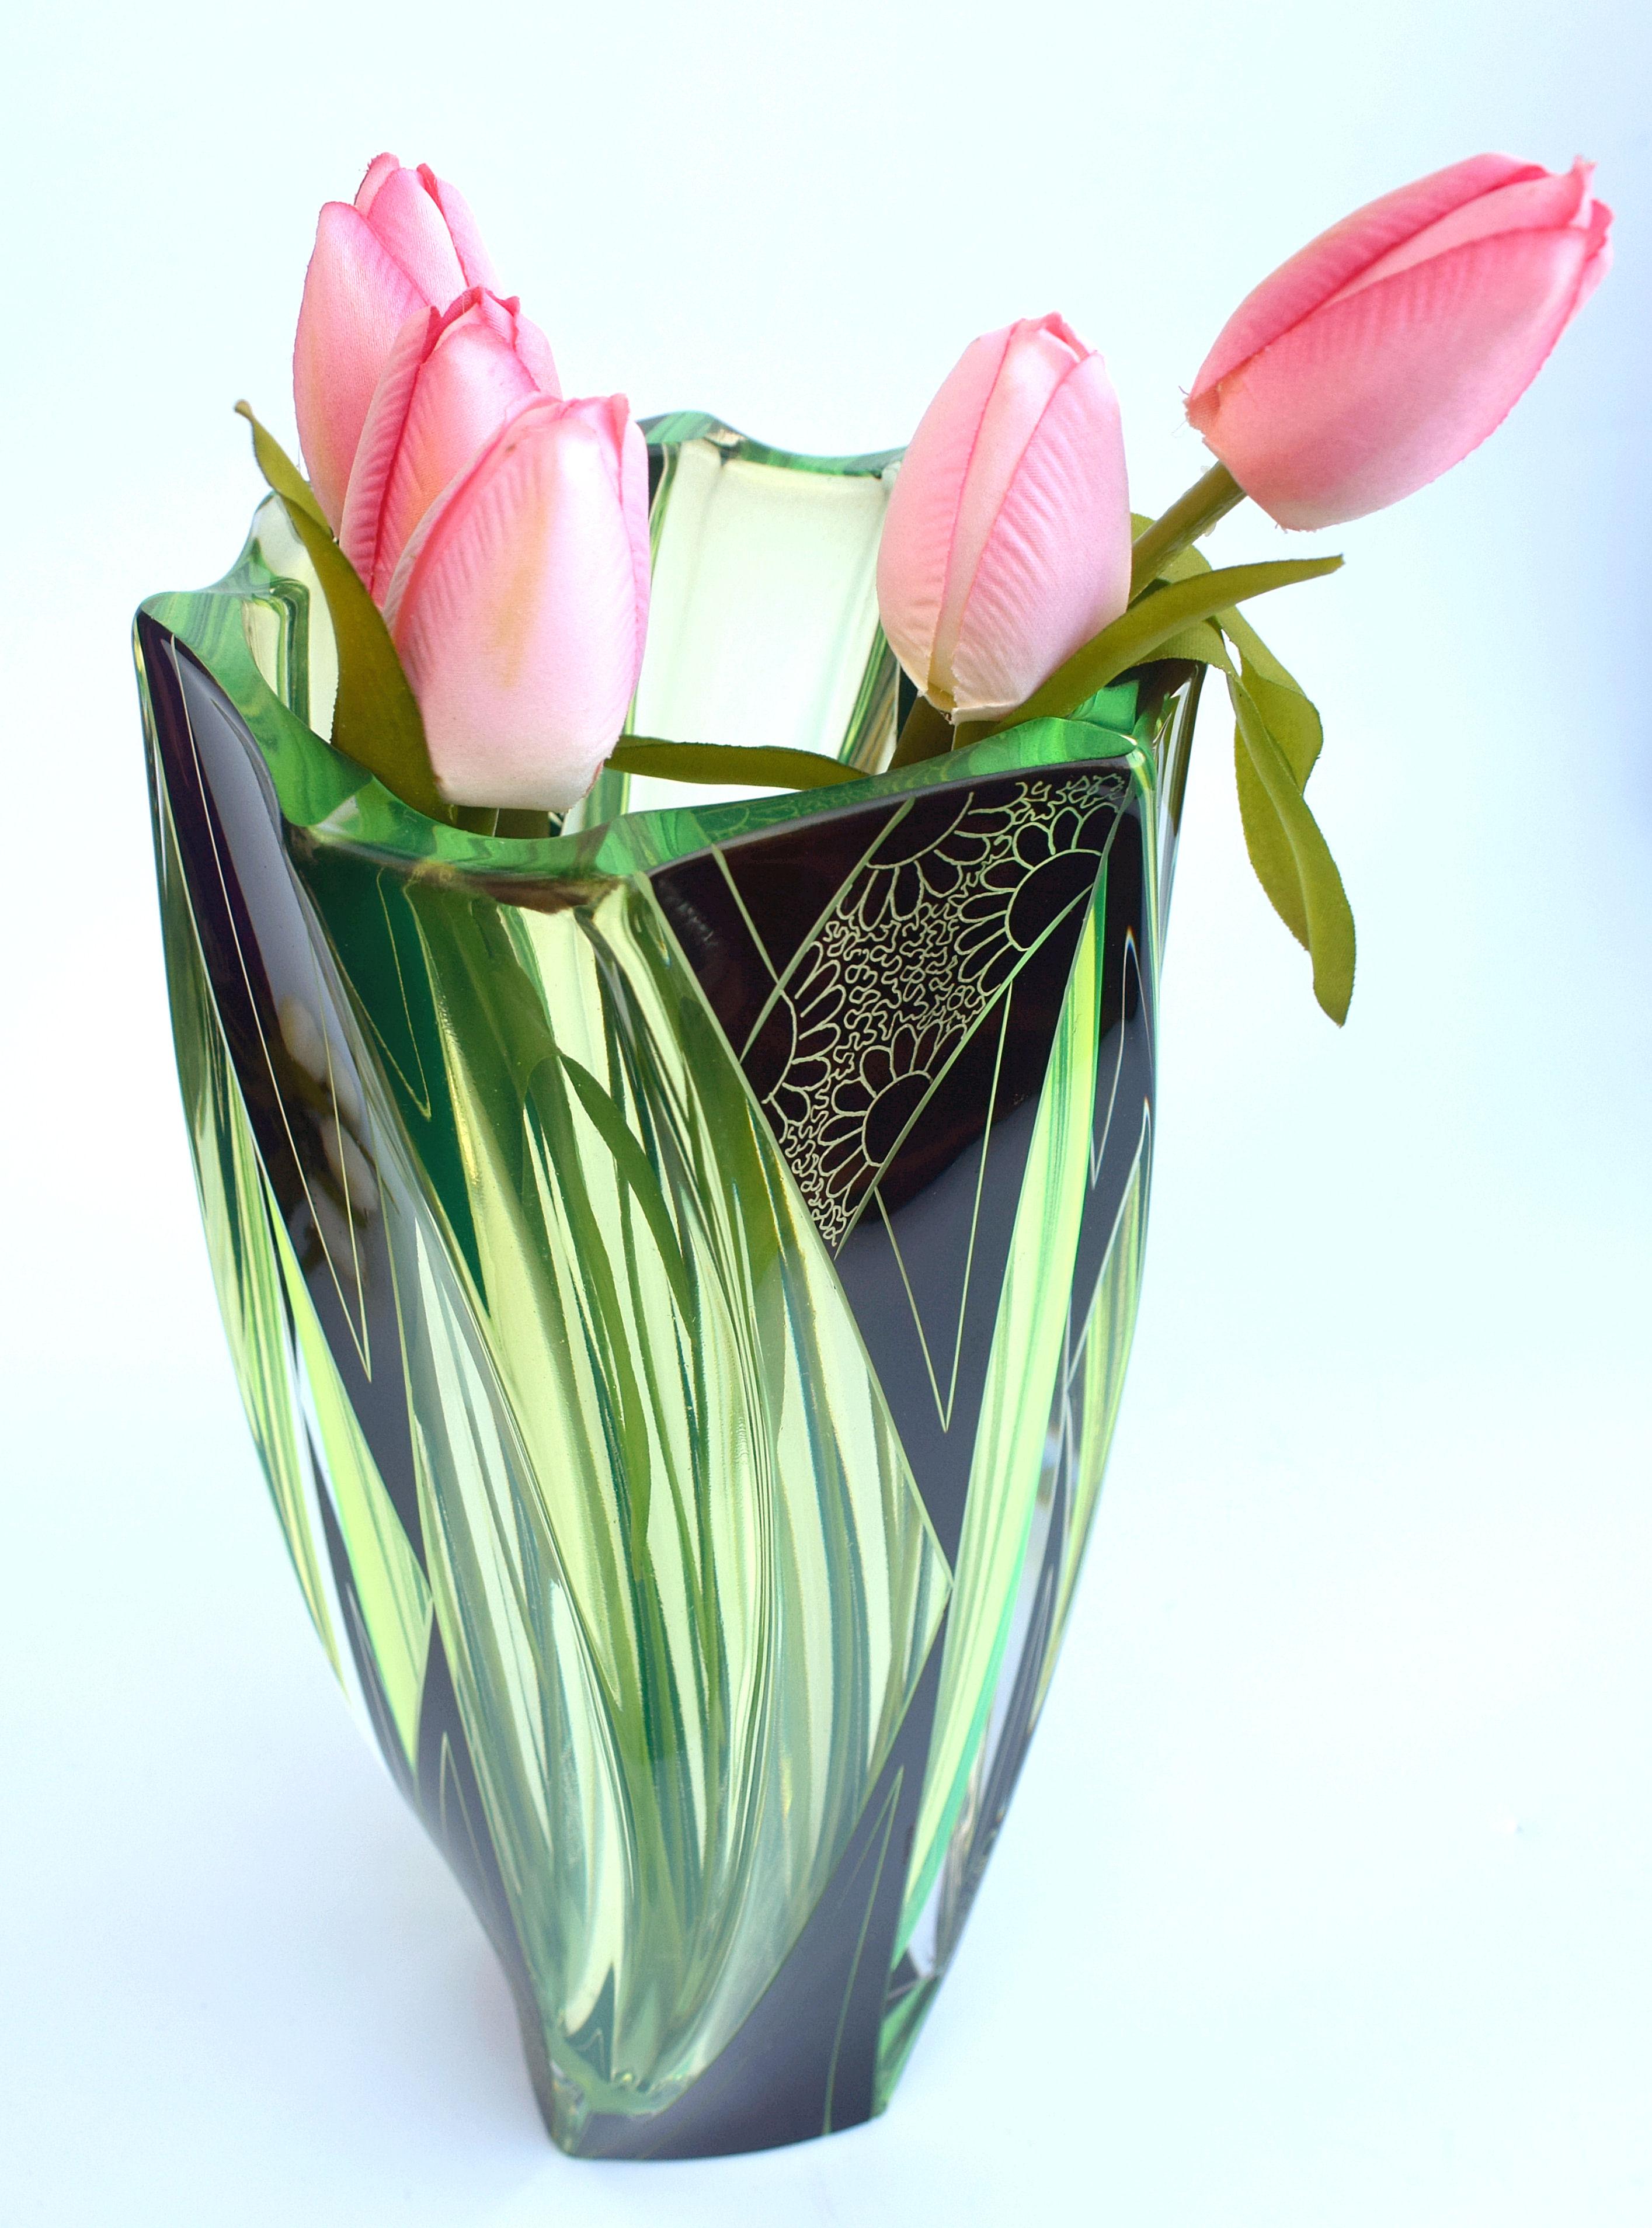 This is without doubt one of our all time favourite Art Deco vases. Originating from Czech republic and made by Karl Palda this vase packs two punches, not only visually with it's very distinctive green / yellow colouring with jet black enamel